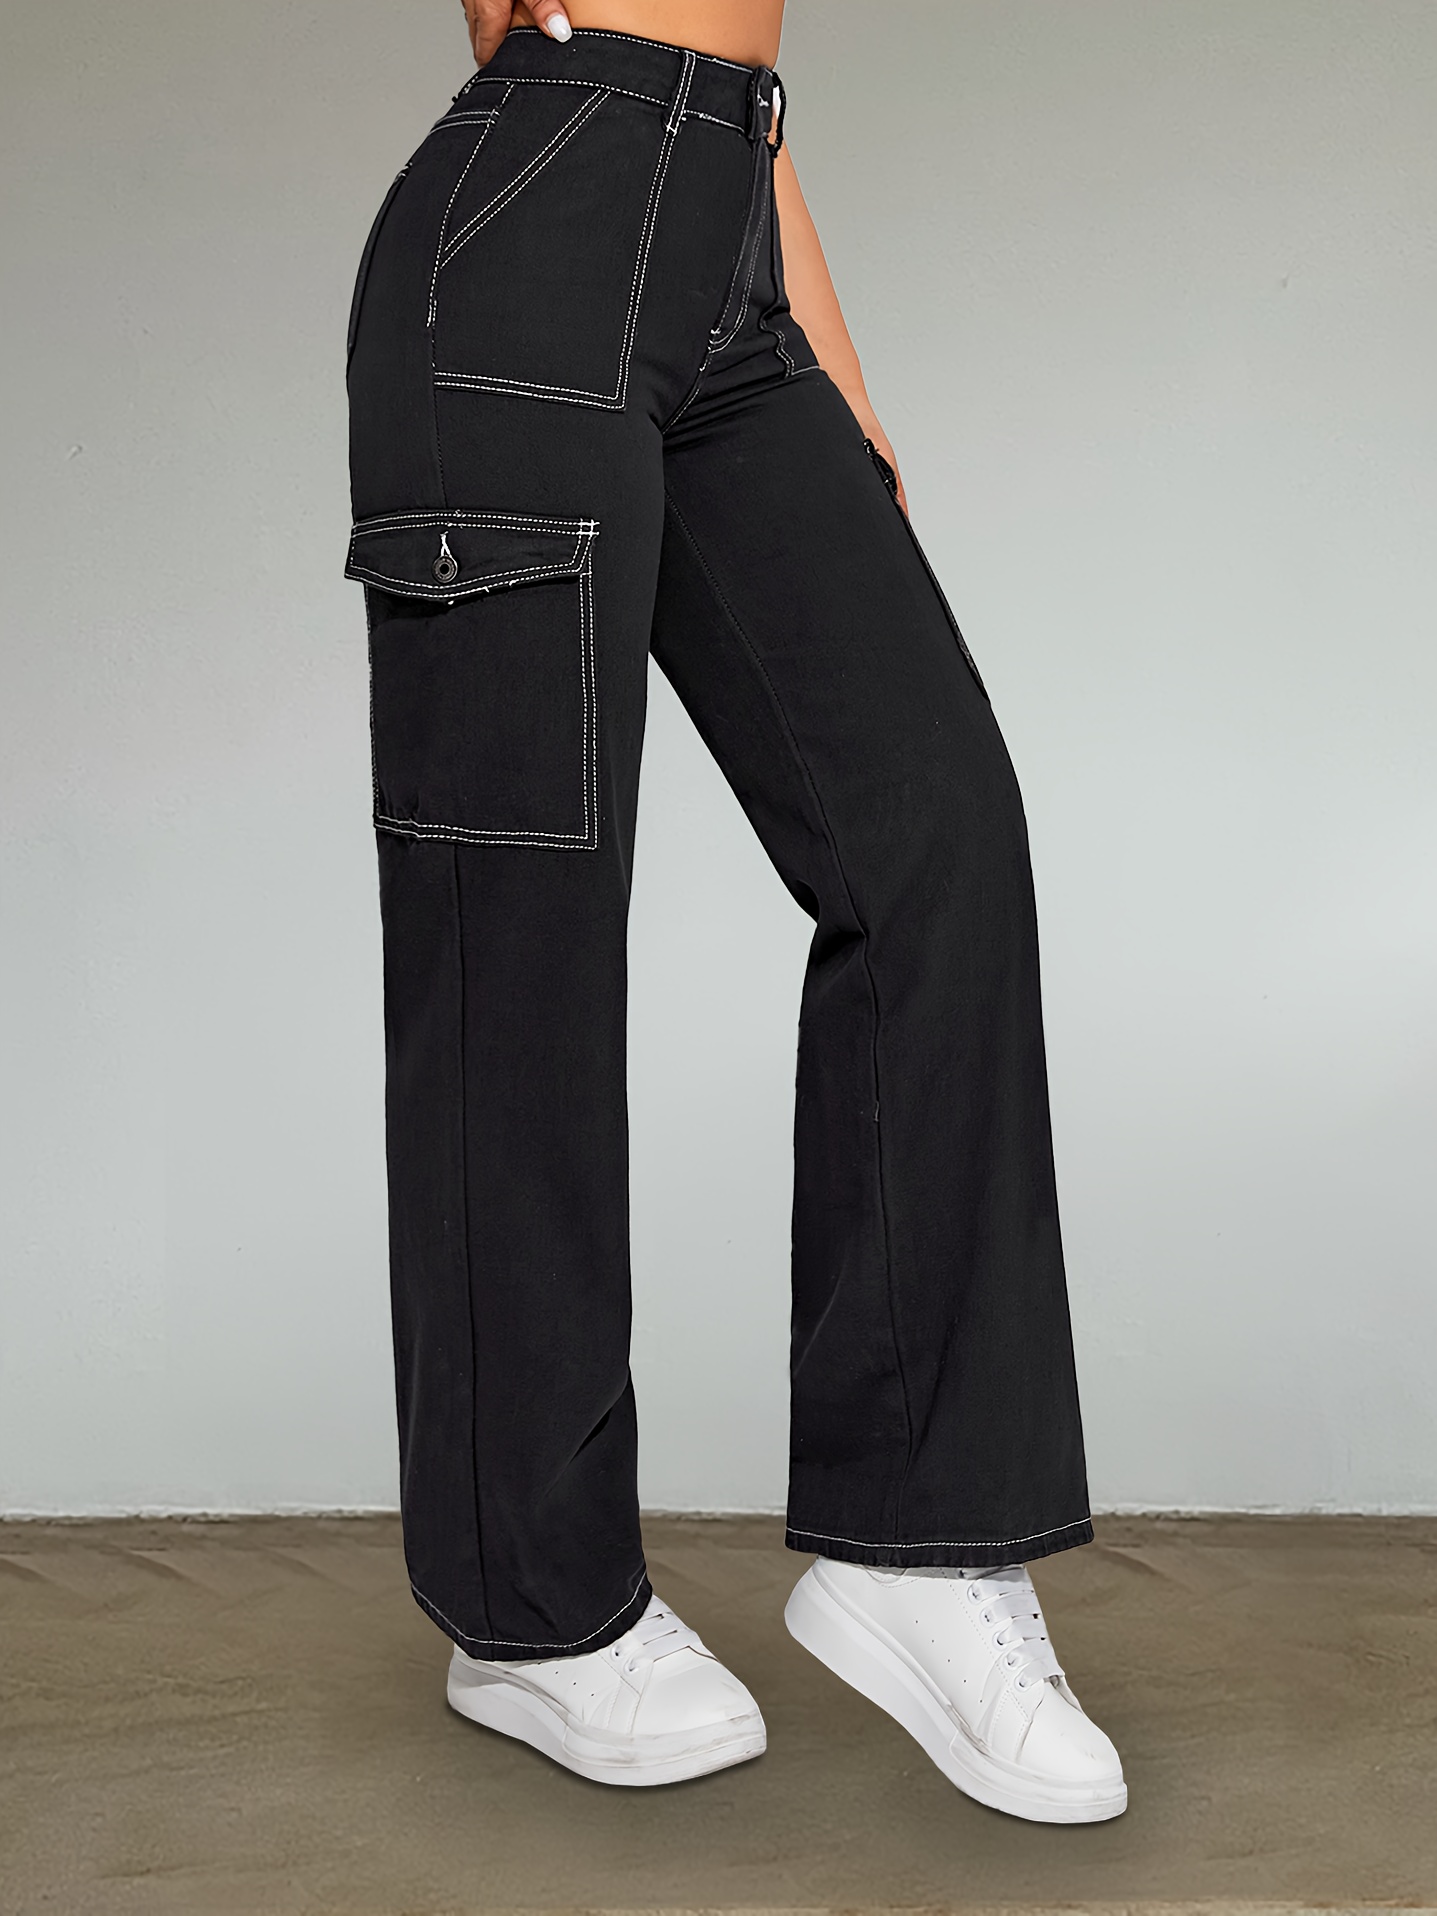 Black Flap Pockets Cargo Pants, Loose Fit Non-Stretch Y2K Straight Jeans,  Women's Denim Jeans & Clothing